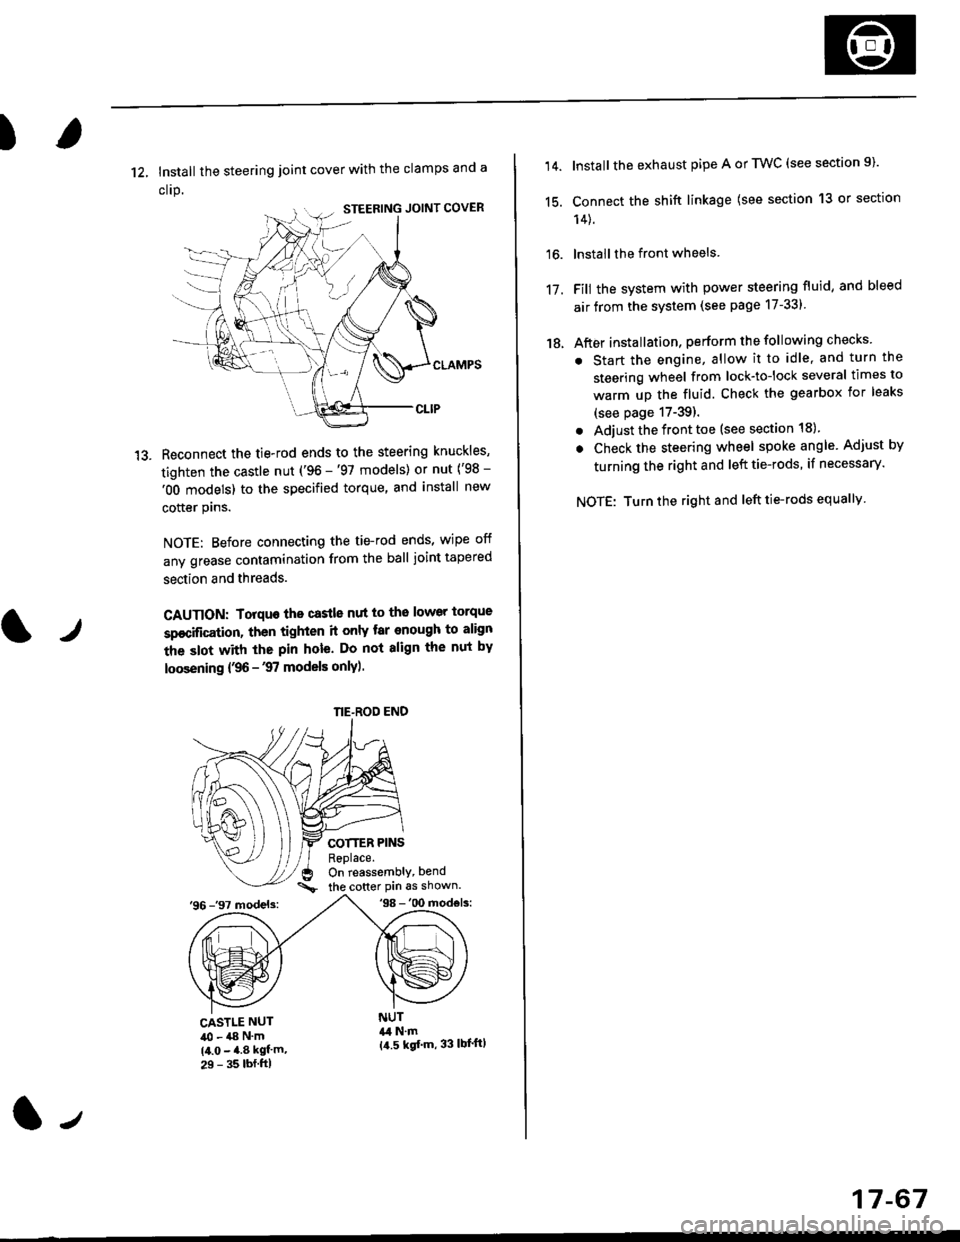 HONDA CIVIC 1996 6.G Owners Manual )
1?
12, Install the steering joint cover with the clamps and a
clrp.
Reconnect the tie-rod ends to the steering knuckles,
tighten the castle nut (96 -97 models) or nut (98 -
OO models) to the spe